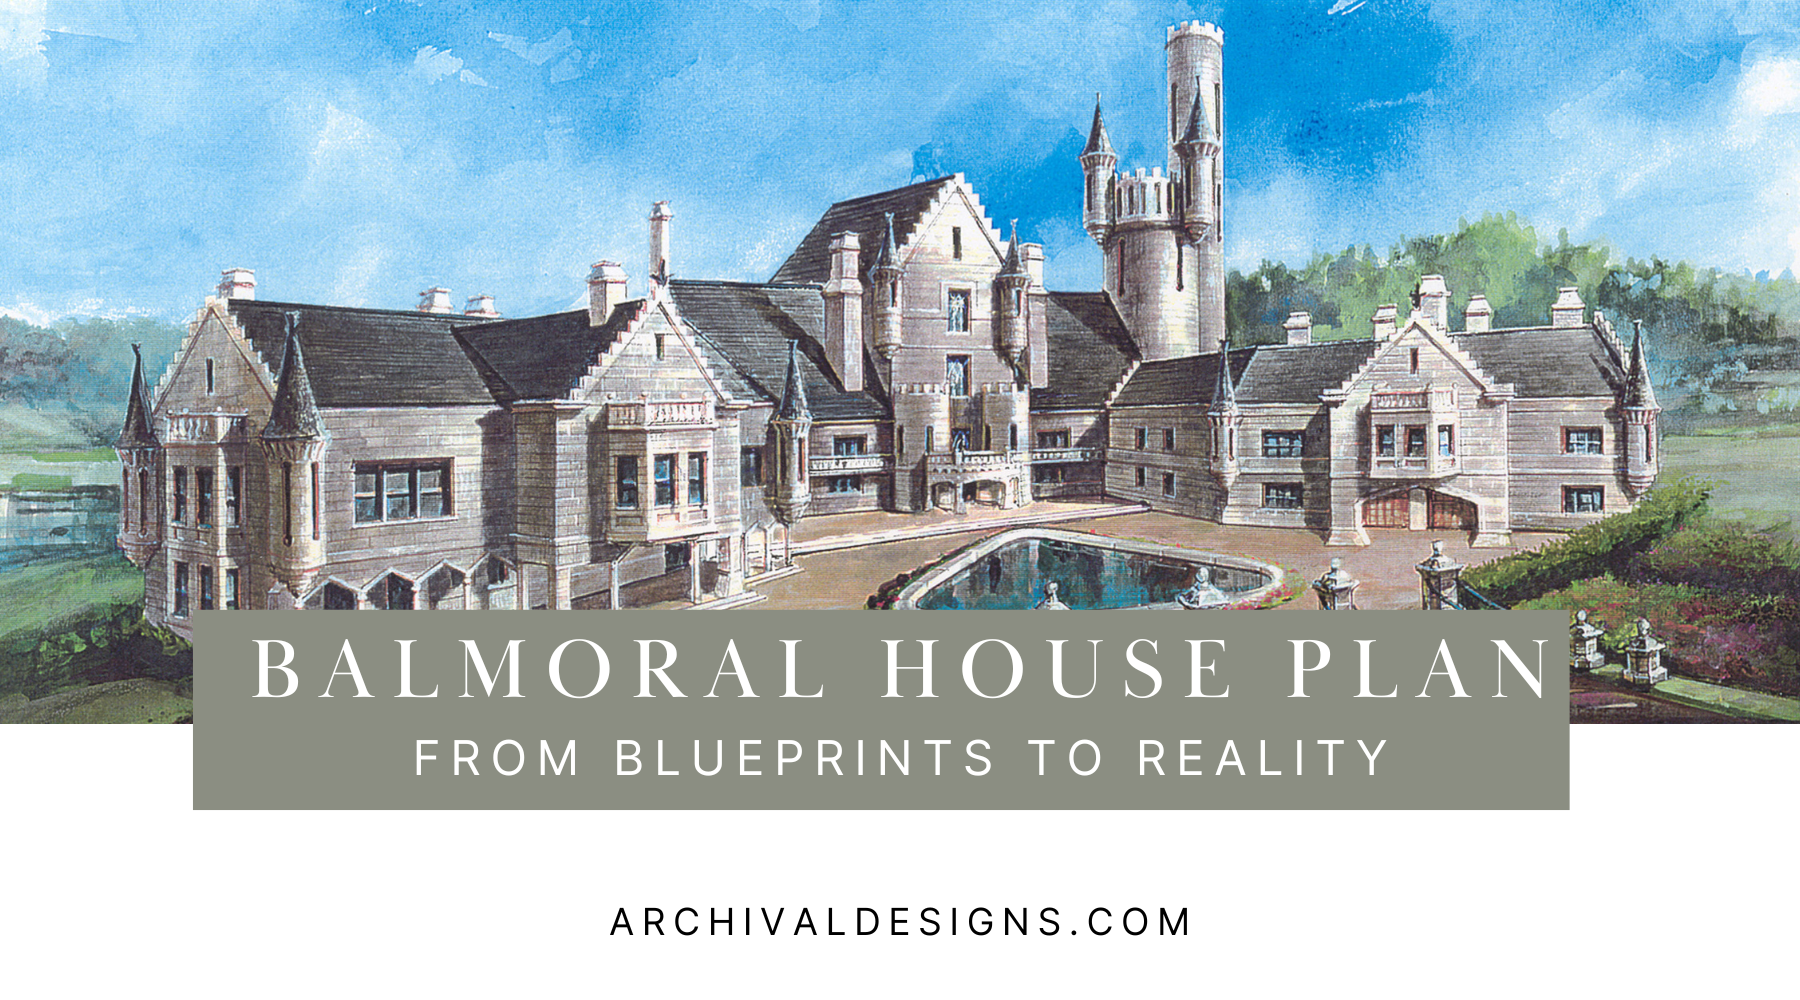 Balmoral House Plan: from blueprints to reality